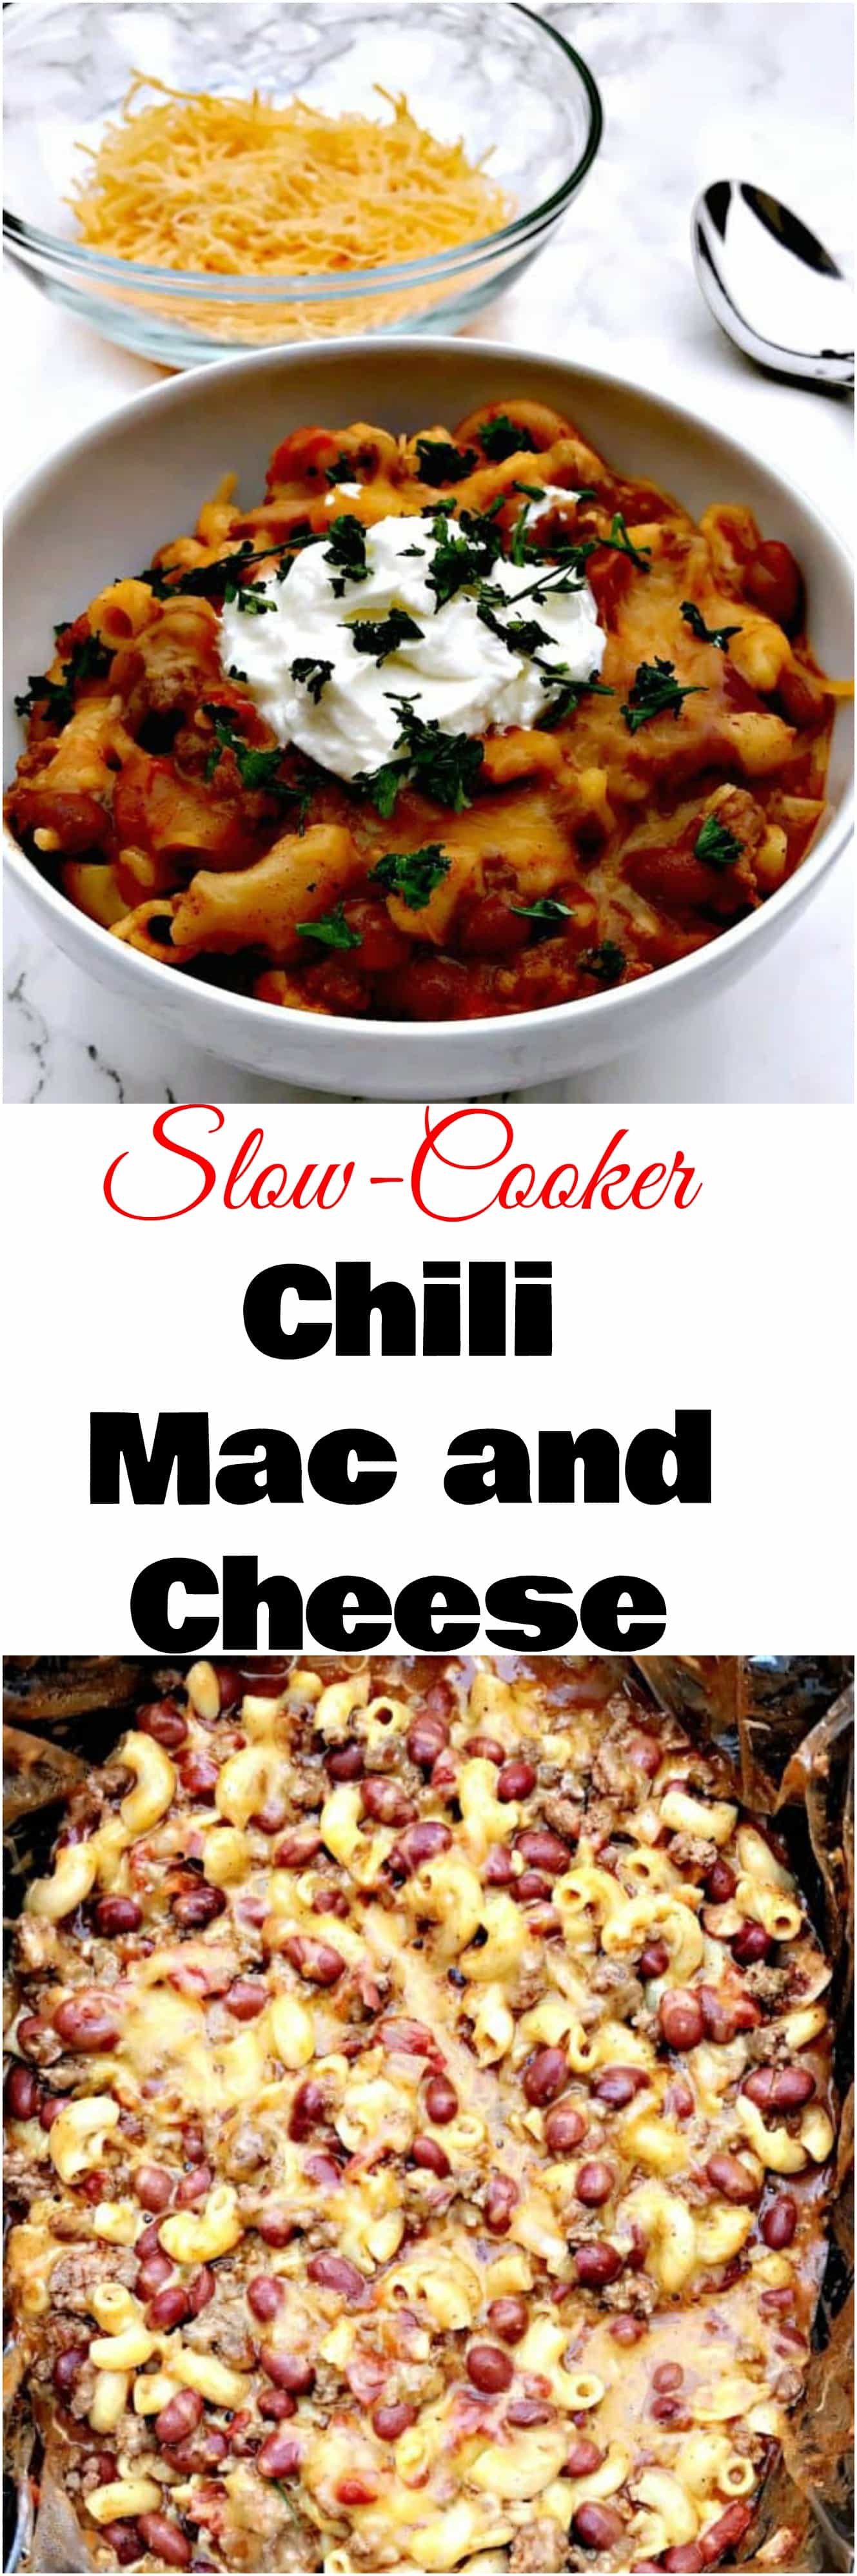 Slow Cooker Chili Mac and Cheese